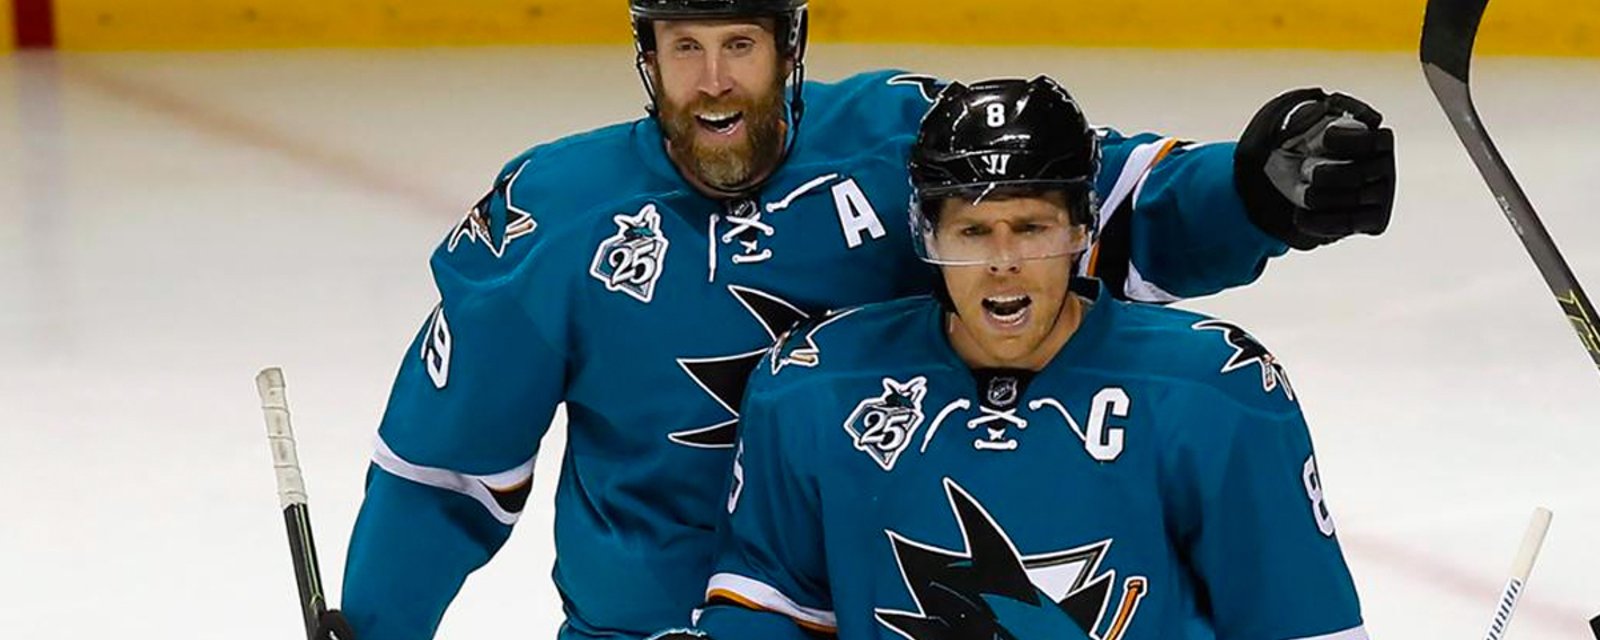 Breaking: Thornton and Pavelski confirm their free agent plans